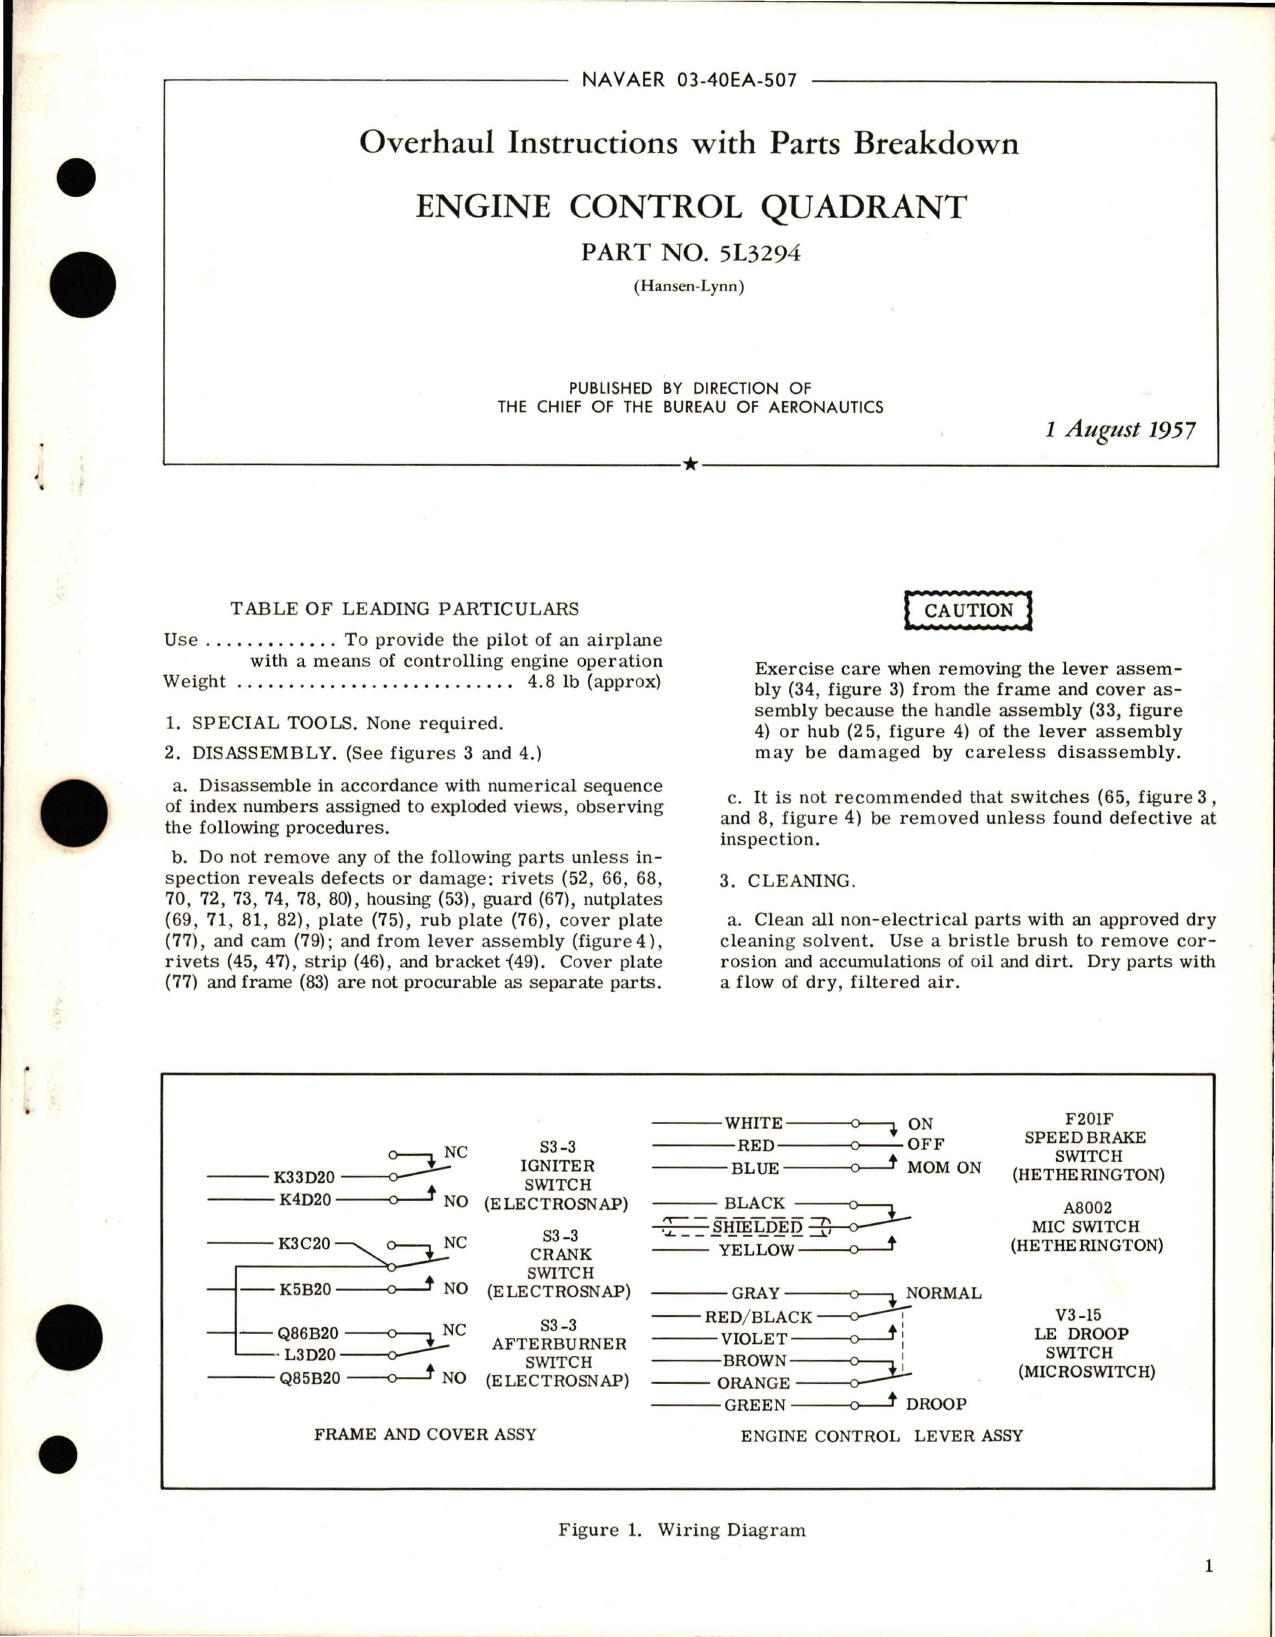 Sample page 1 from AirCorps Library document: Overhaul Instructions with Parts Breakdown for Engine Control Quadrant - Part 5L3294